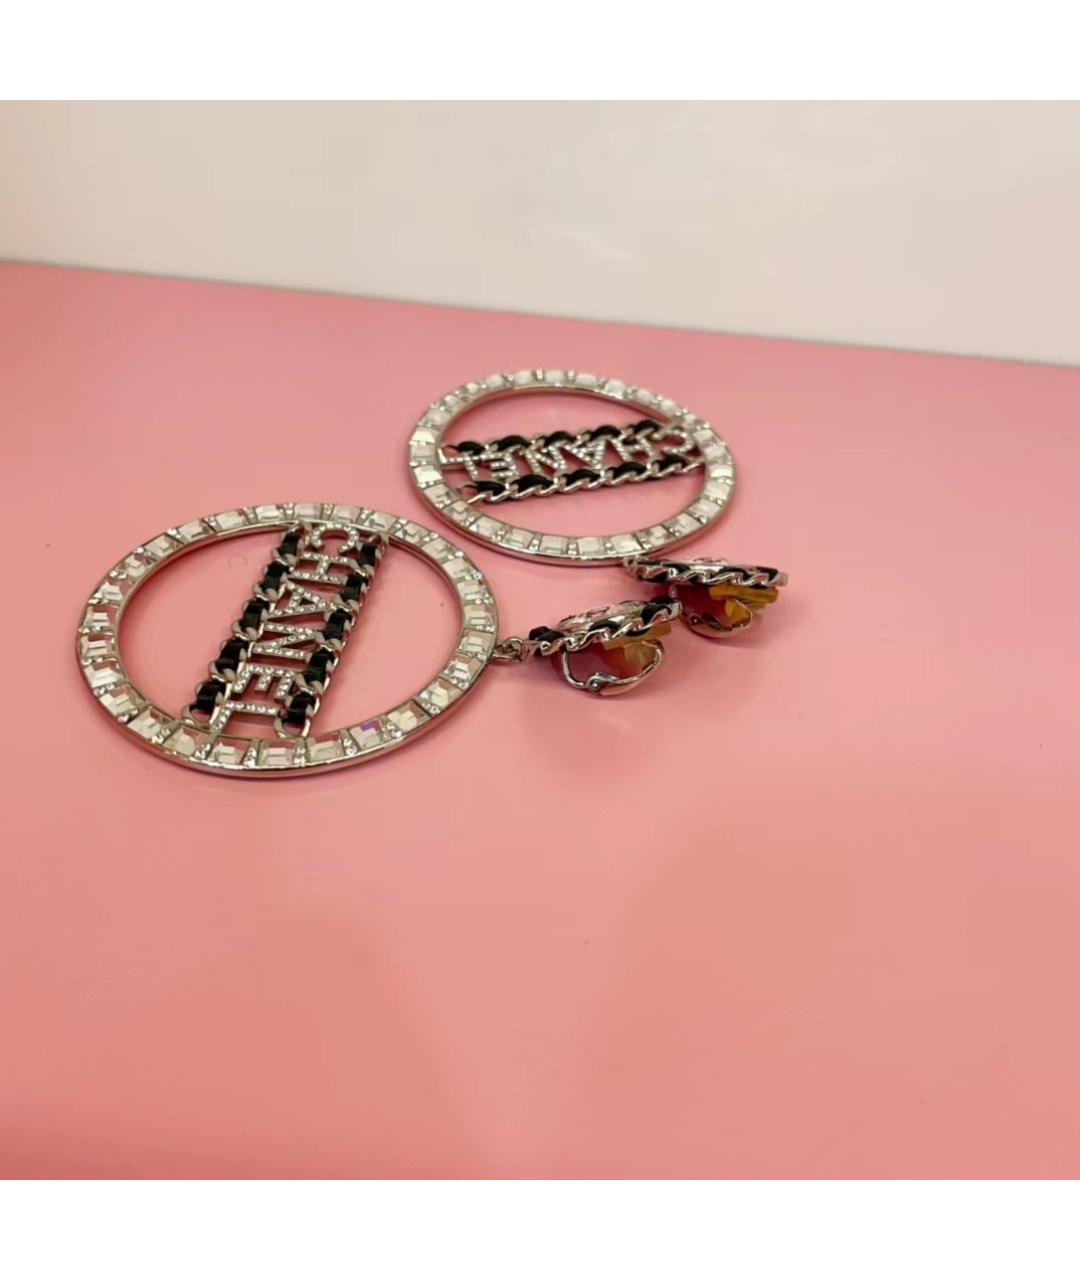 CHANEL PRE-OWNED Серьги, фото 3